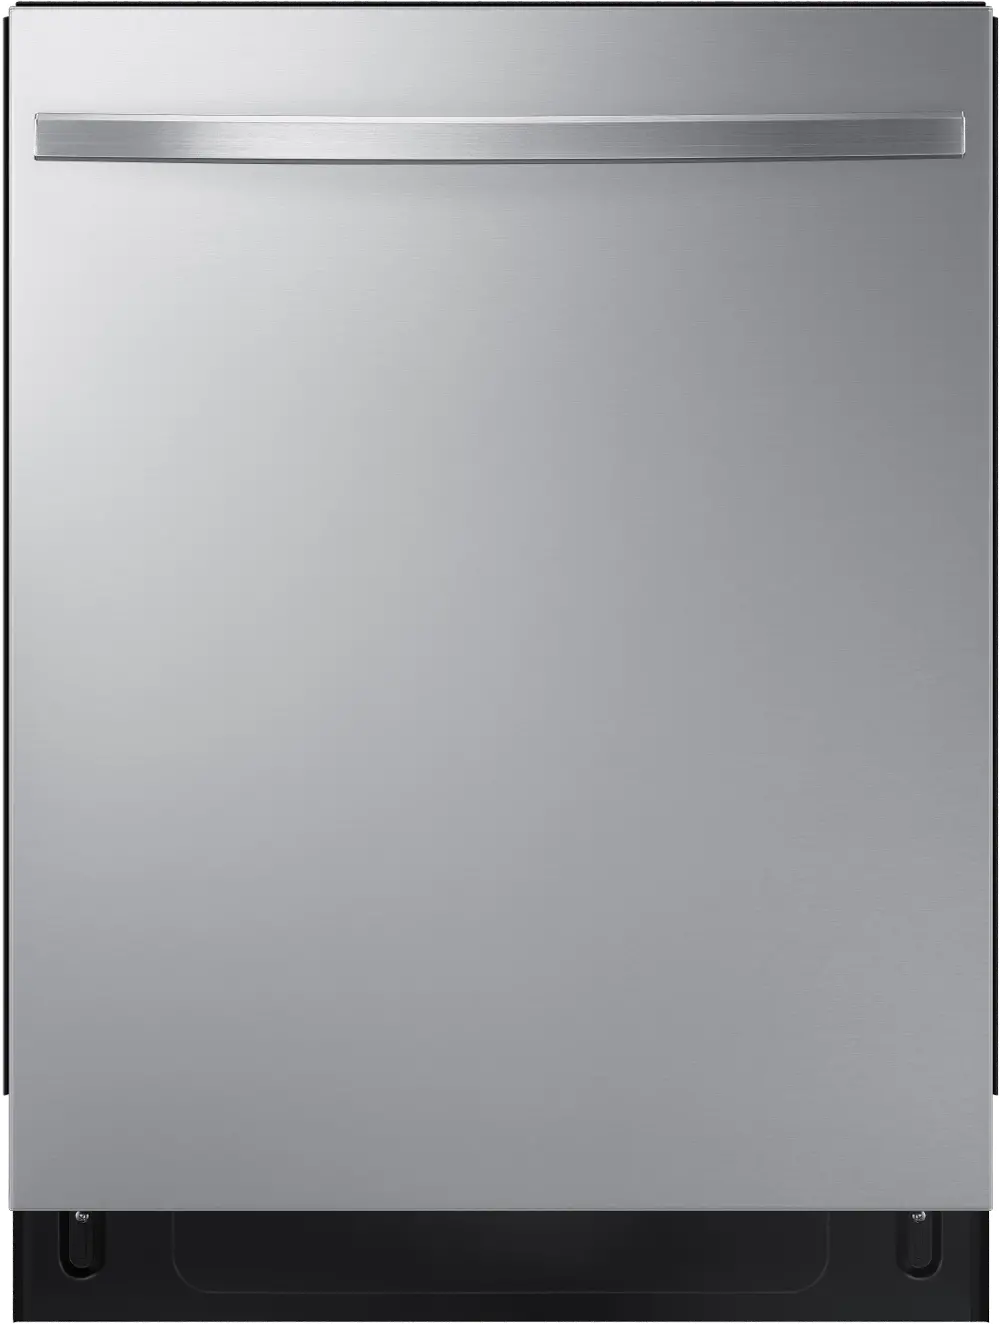 DW80R5061US Samsung Top Control Dishwasher - Stainless Steel-1